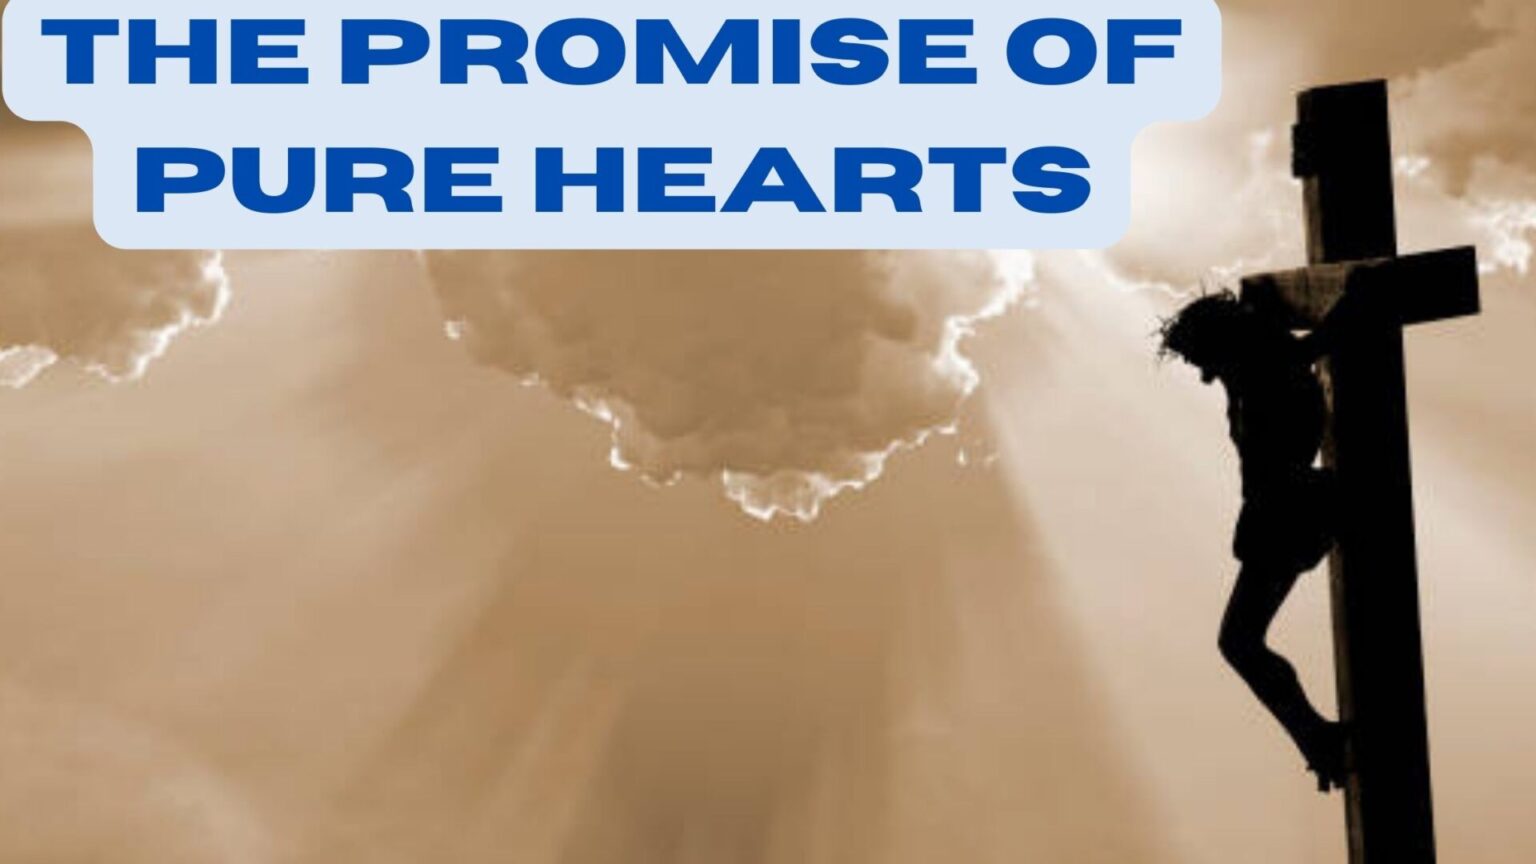 The Promise of Pure Hearts